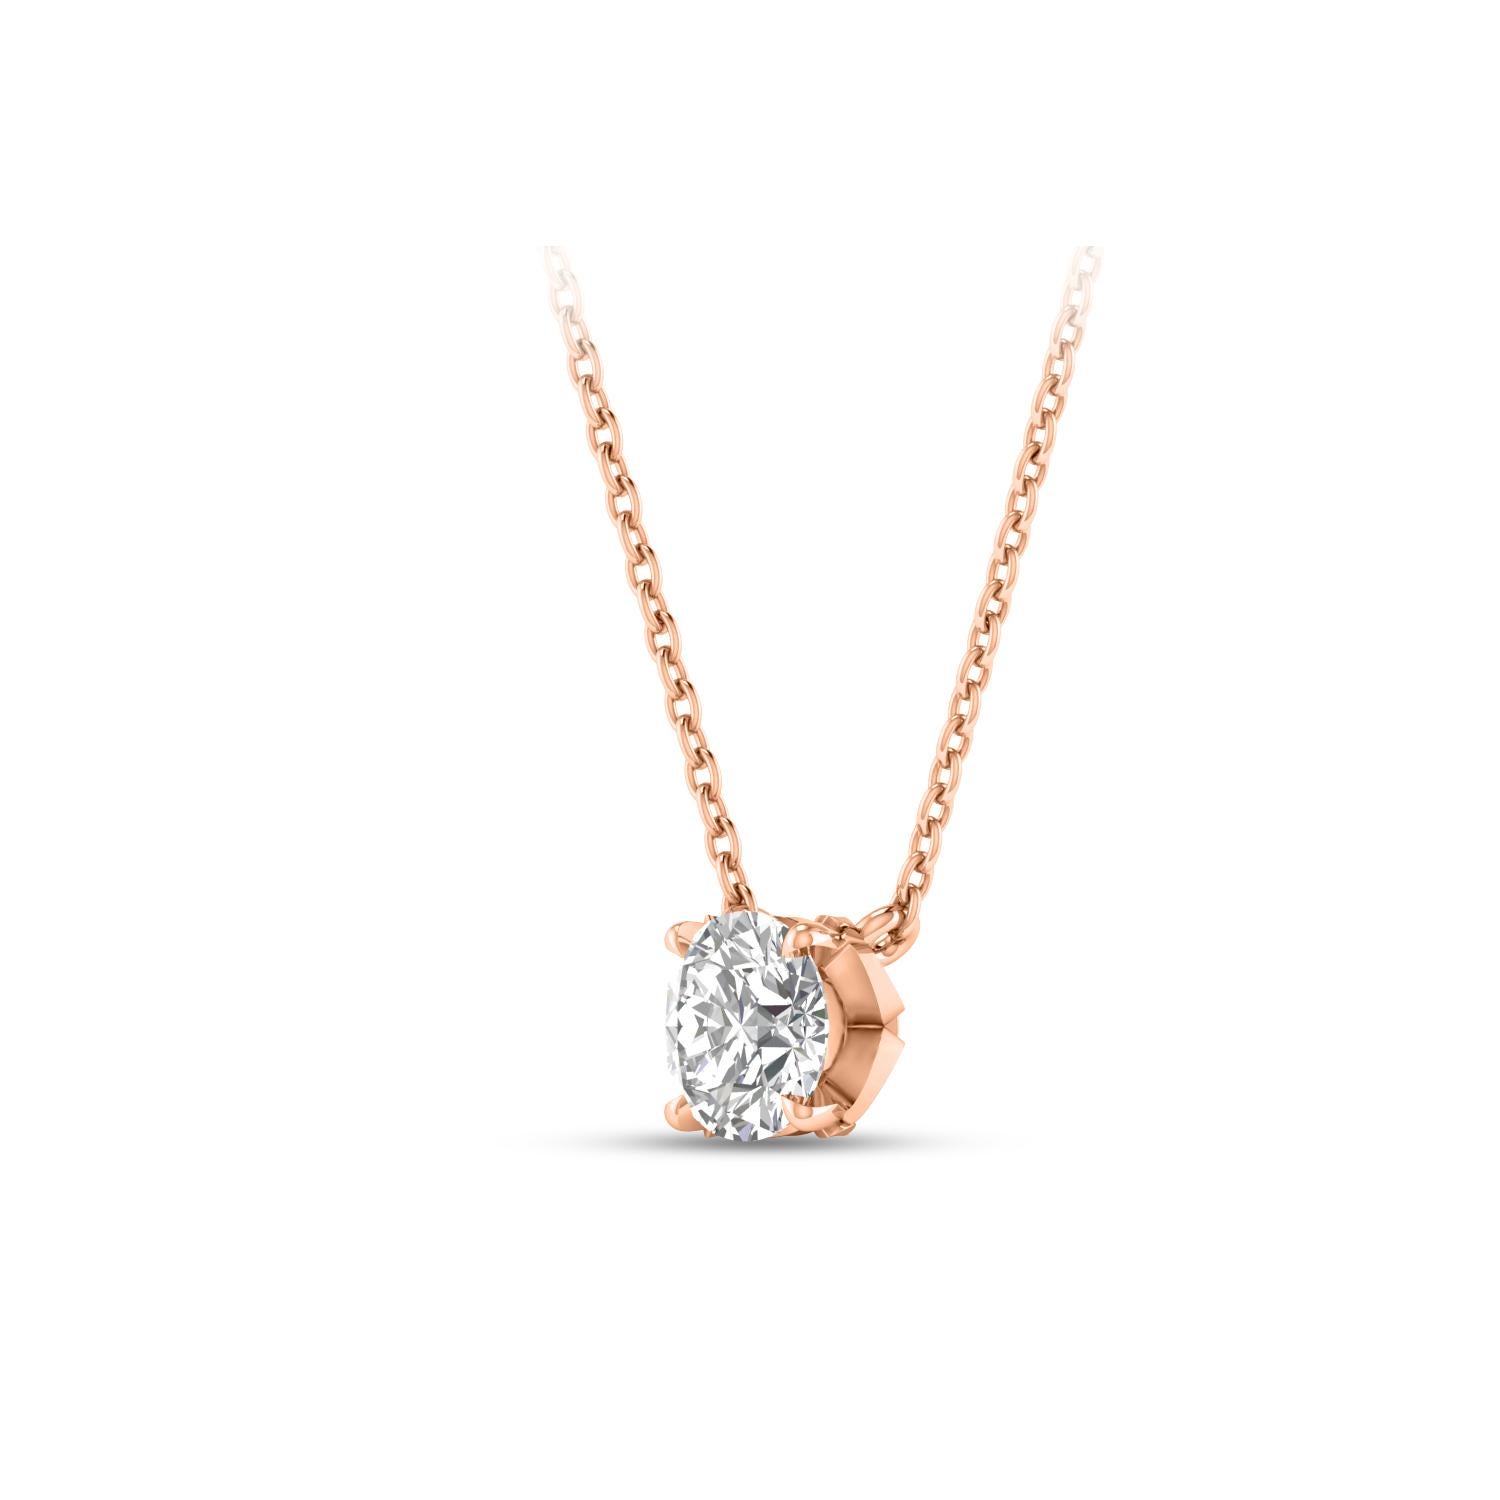  This solitaire diamond necklace features a single, brilliant-cut 0.28 carat diamond in prong setting crafted in 18 KT rose gold. This elegant necklace includes 20-inch cable chain with extender at 18-inch. 

(Carat weights may vary slightly due to